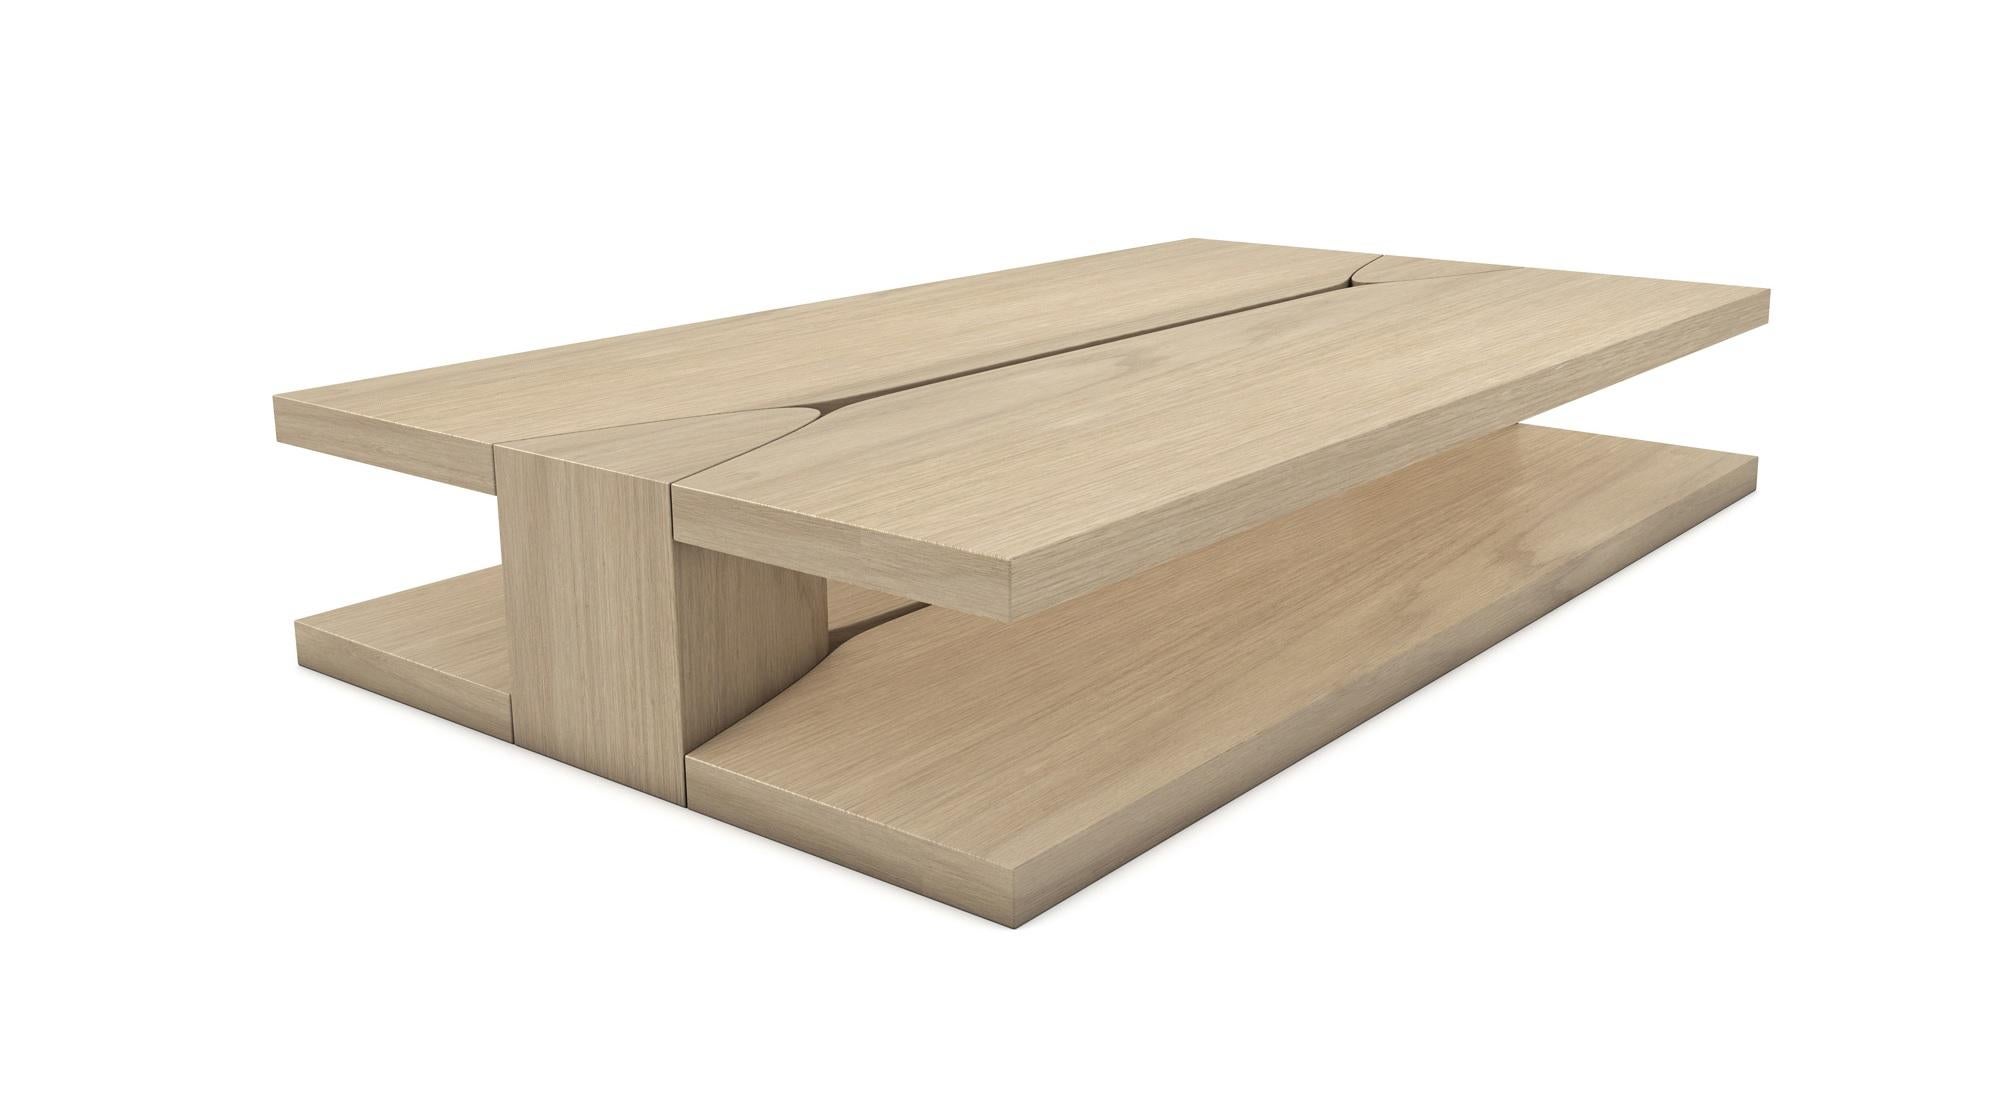 Brushed oak amarante low table by LK Edition.
Limited edition. 
Dimensions: 180 x 110 x H 40 cm.
Materials: oak. 
Also available in oak.

It is with the sense of detail and requirement, this research of the exception by the selection of noble